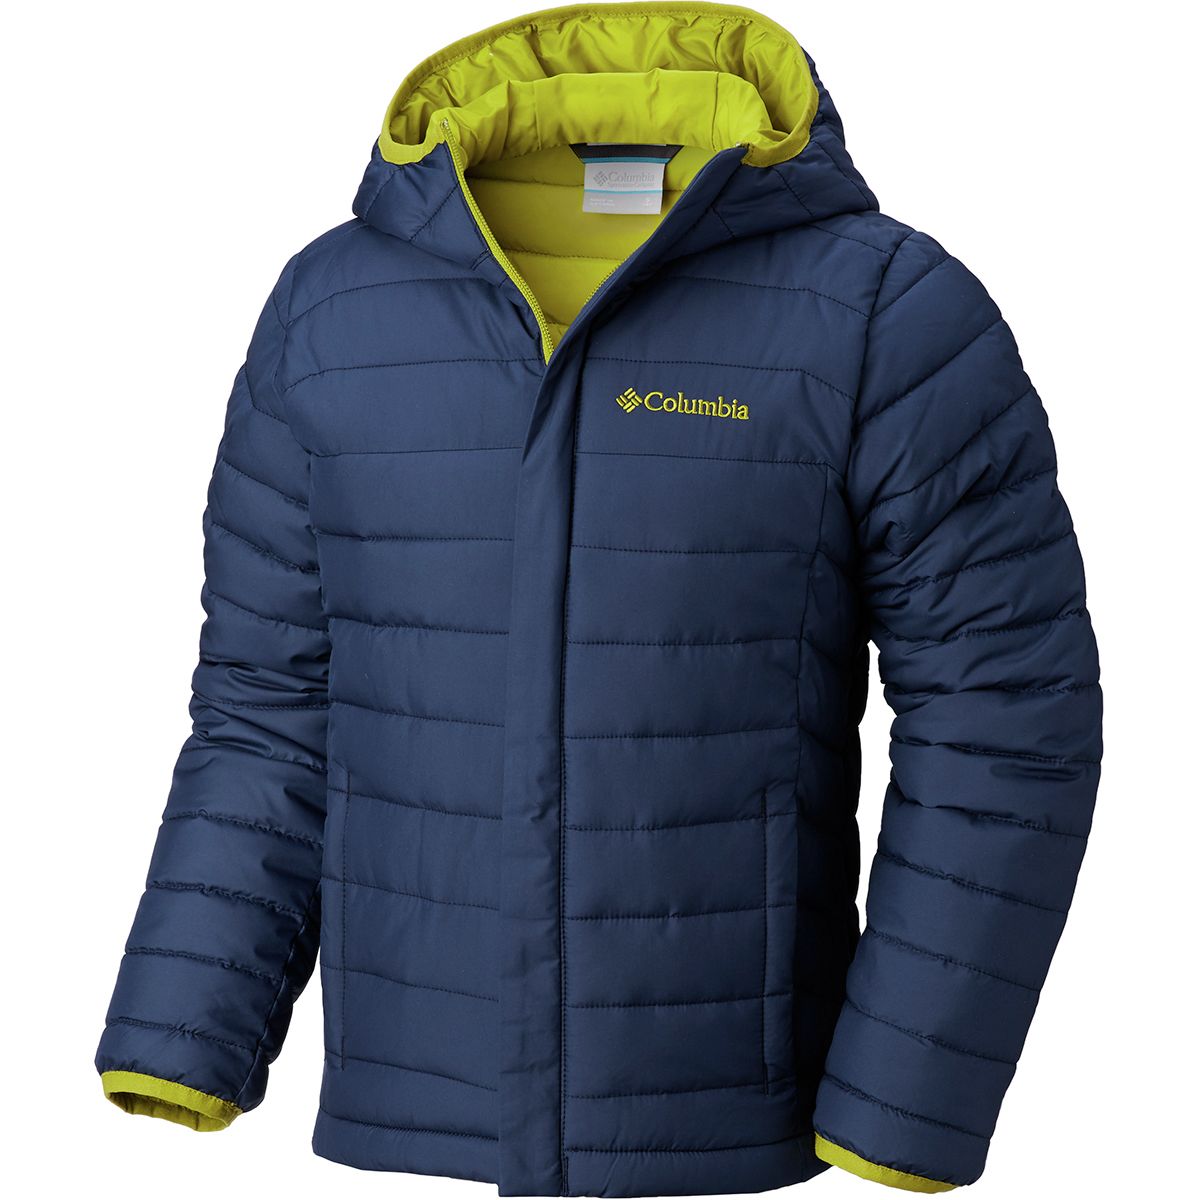 BestRated Toddler Boys Warm Winter Jackets Reviews Adorable Children's Clothing & Accessories